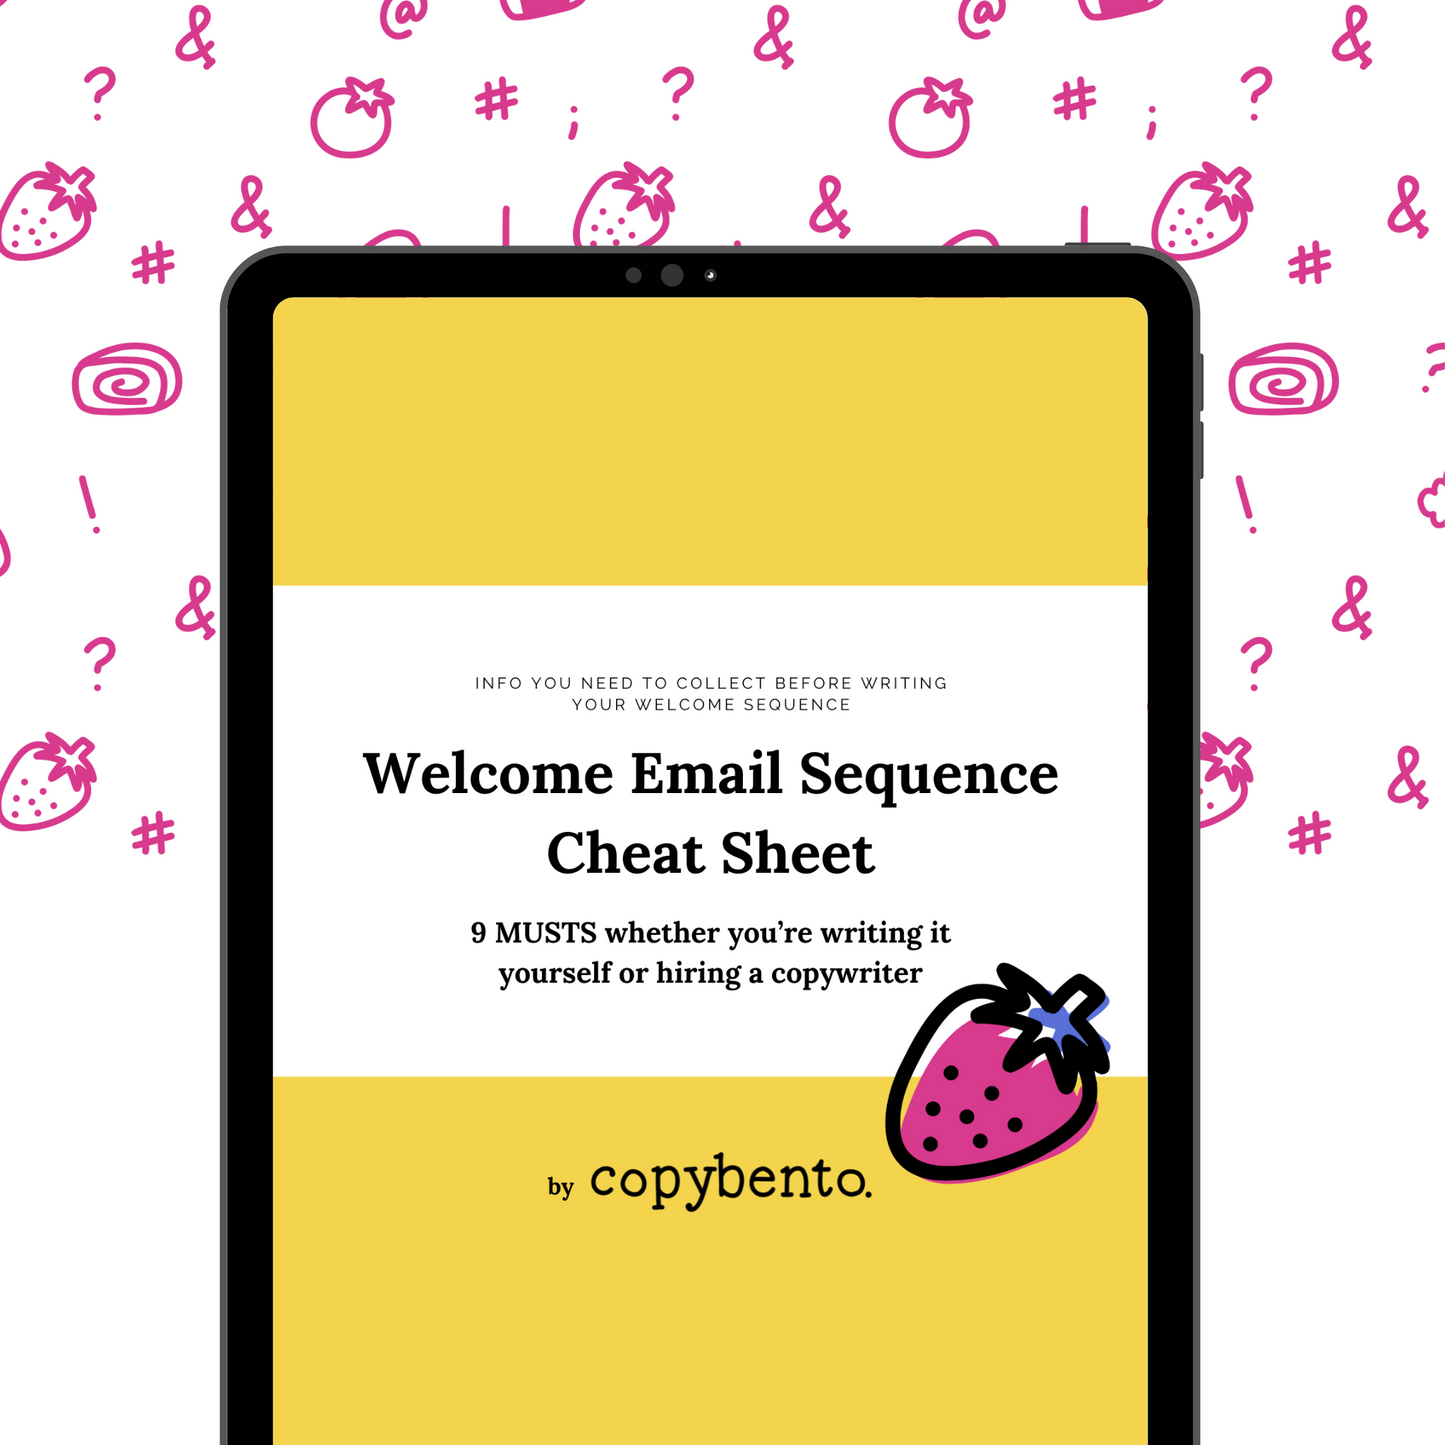 Welcome Email Sequence Cheat Sheet (Freebie)